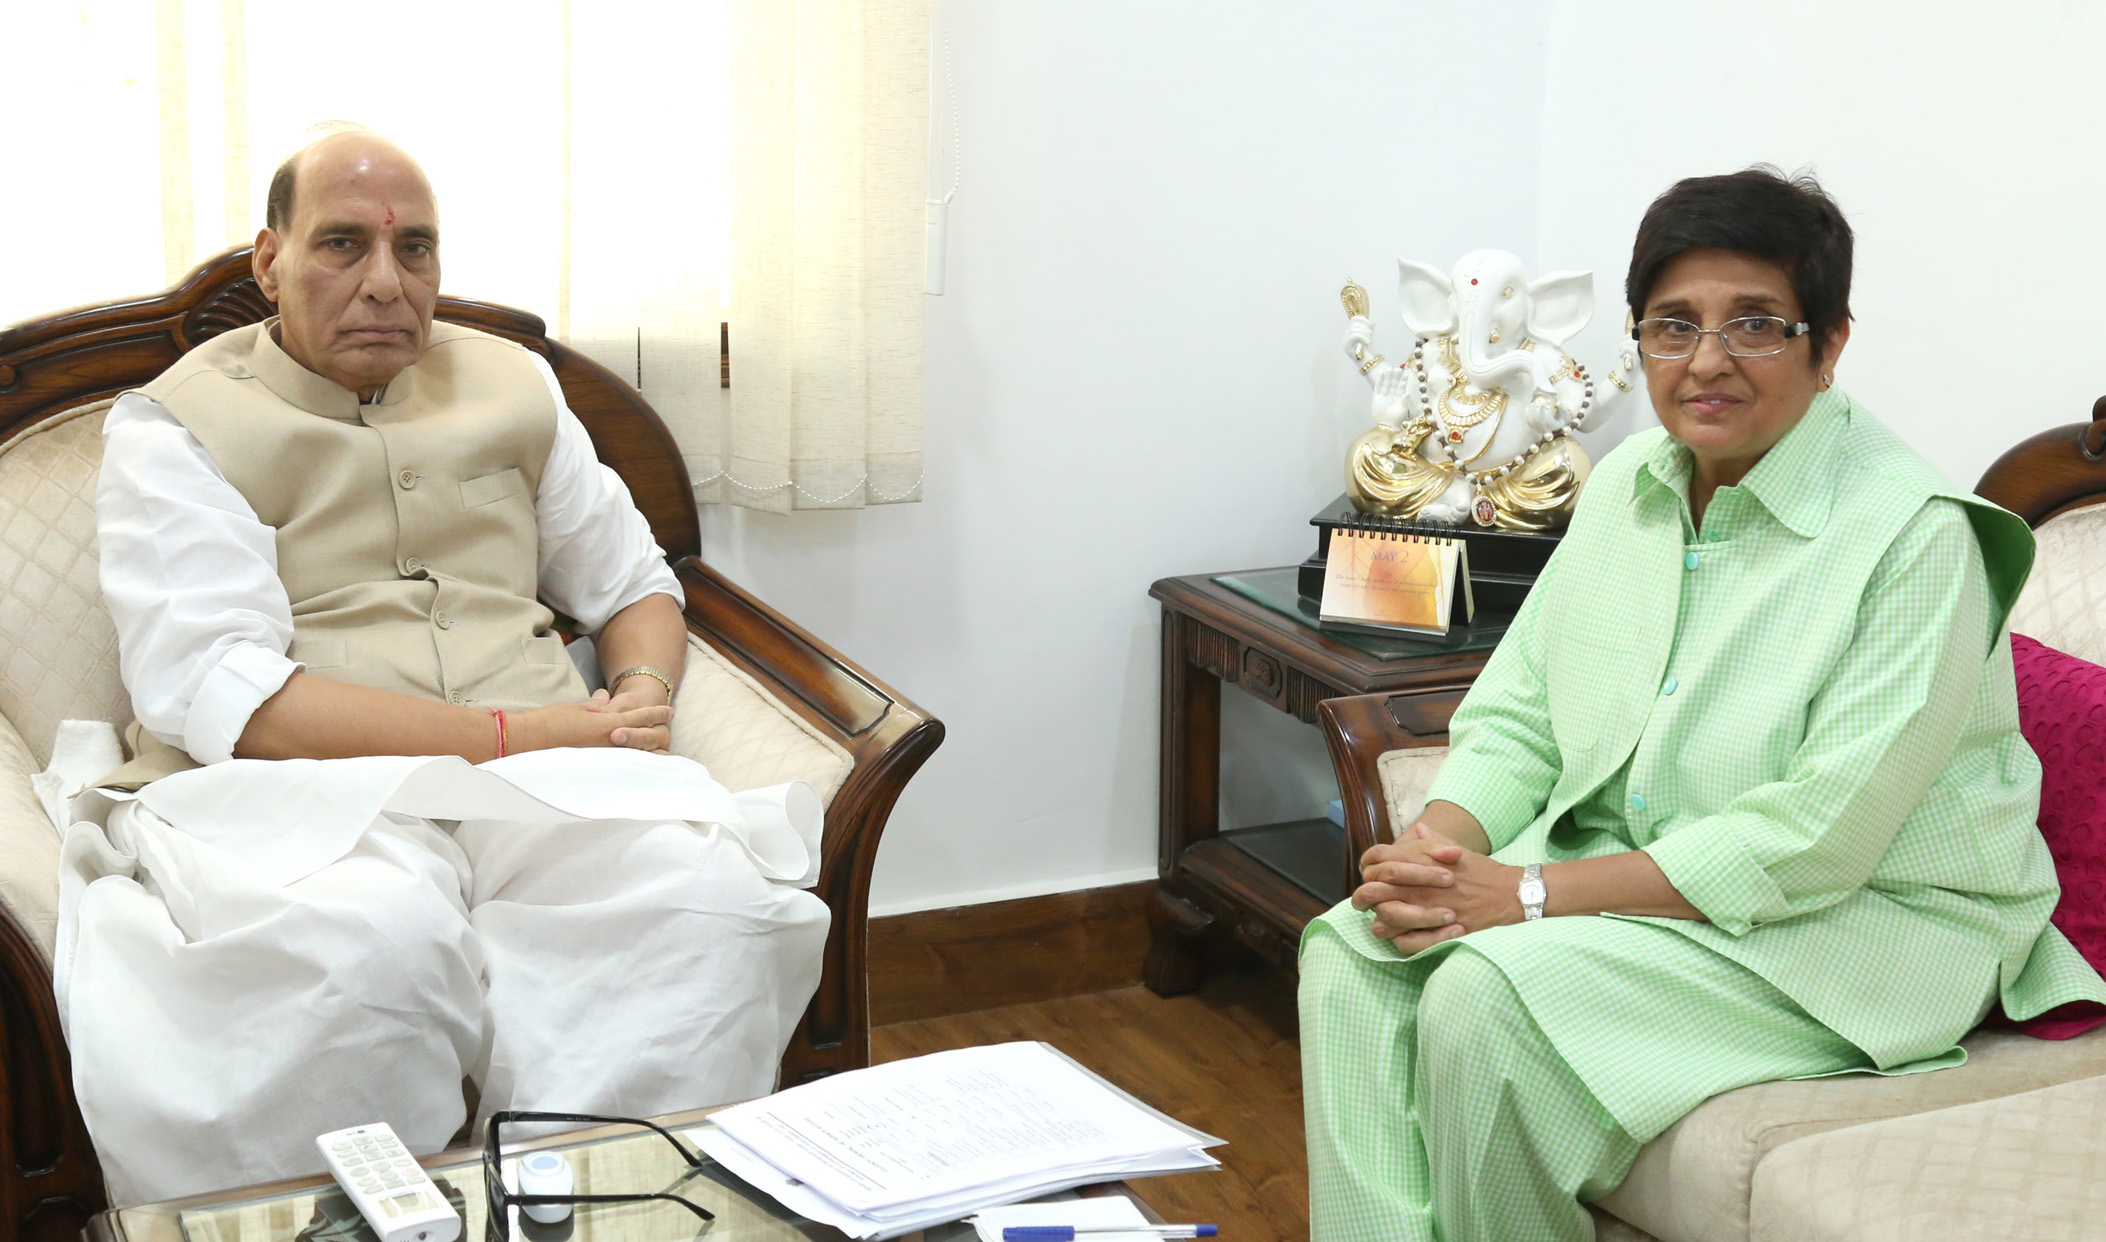 The Lieutenant Governor of Puducherry Dr. Kiran Bedi calling on the Union Home Minister, Shri Rajnath Singh, in New Delhi on May 02, 2017.